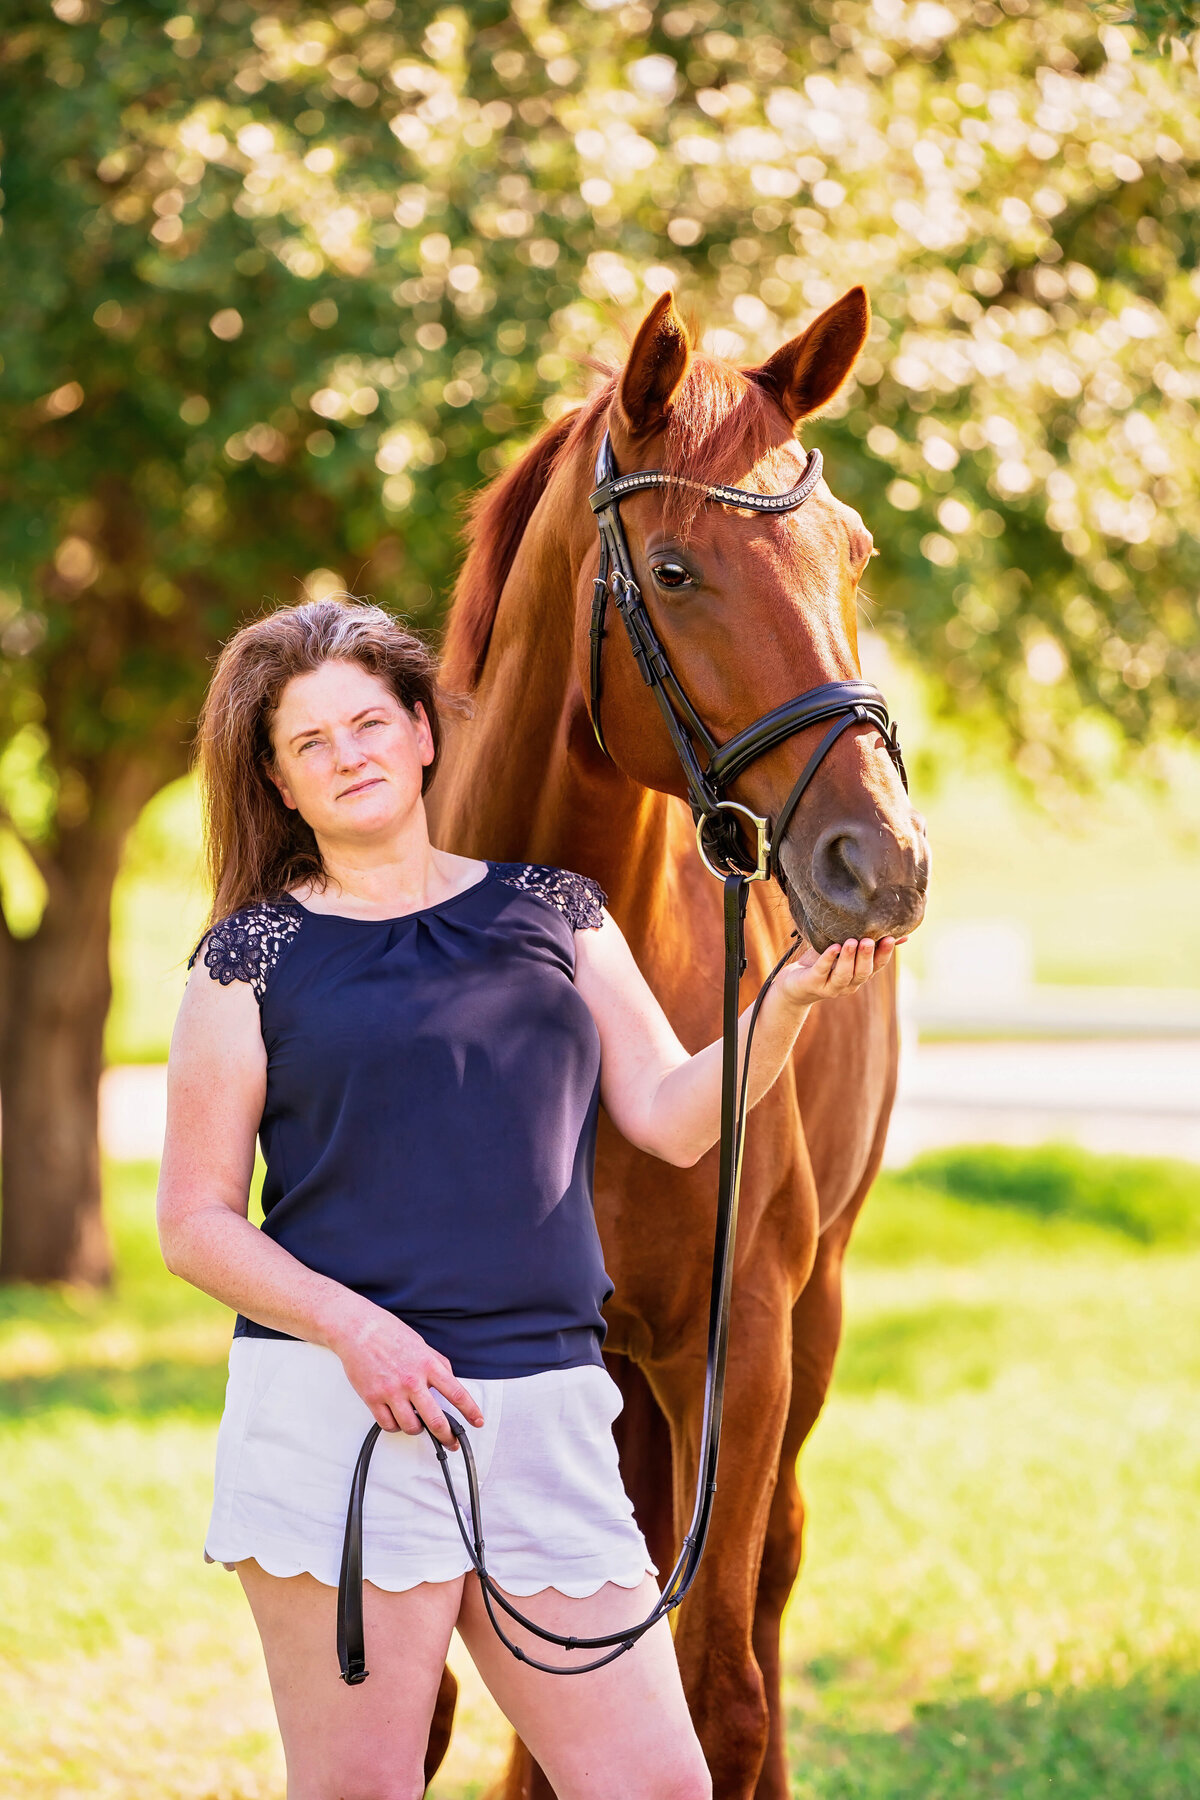 Female equestrian poses in shorts and a blue shirt while her chestnut warmblood horse looks over her shoulder and nuzzles her hand.